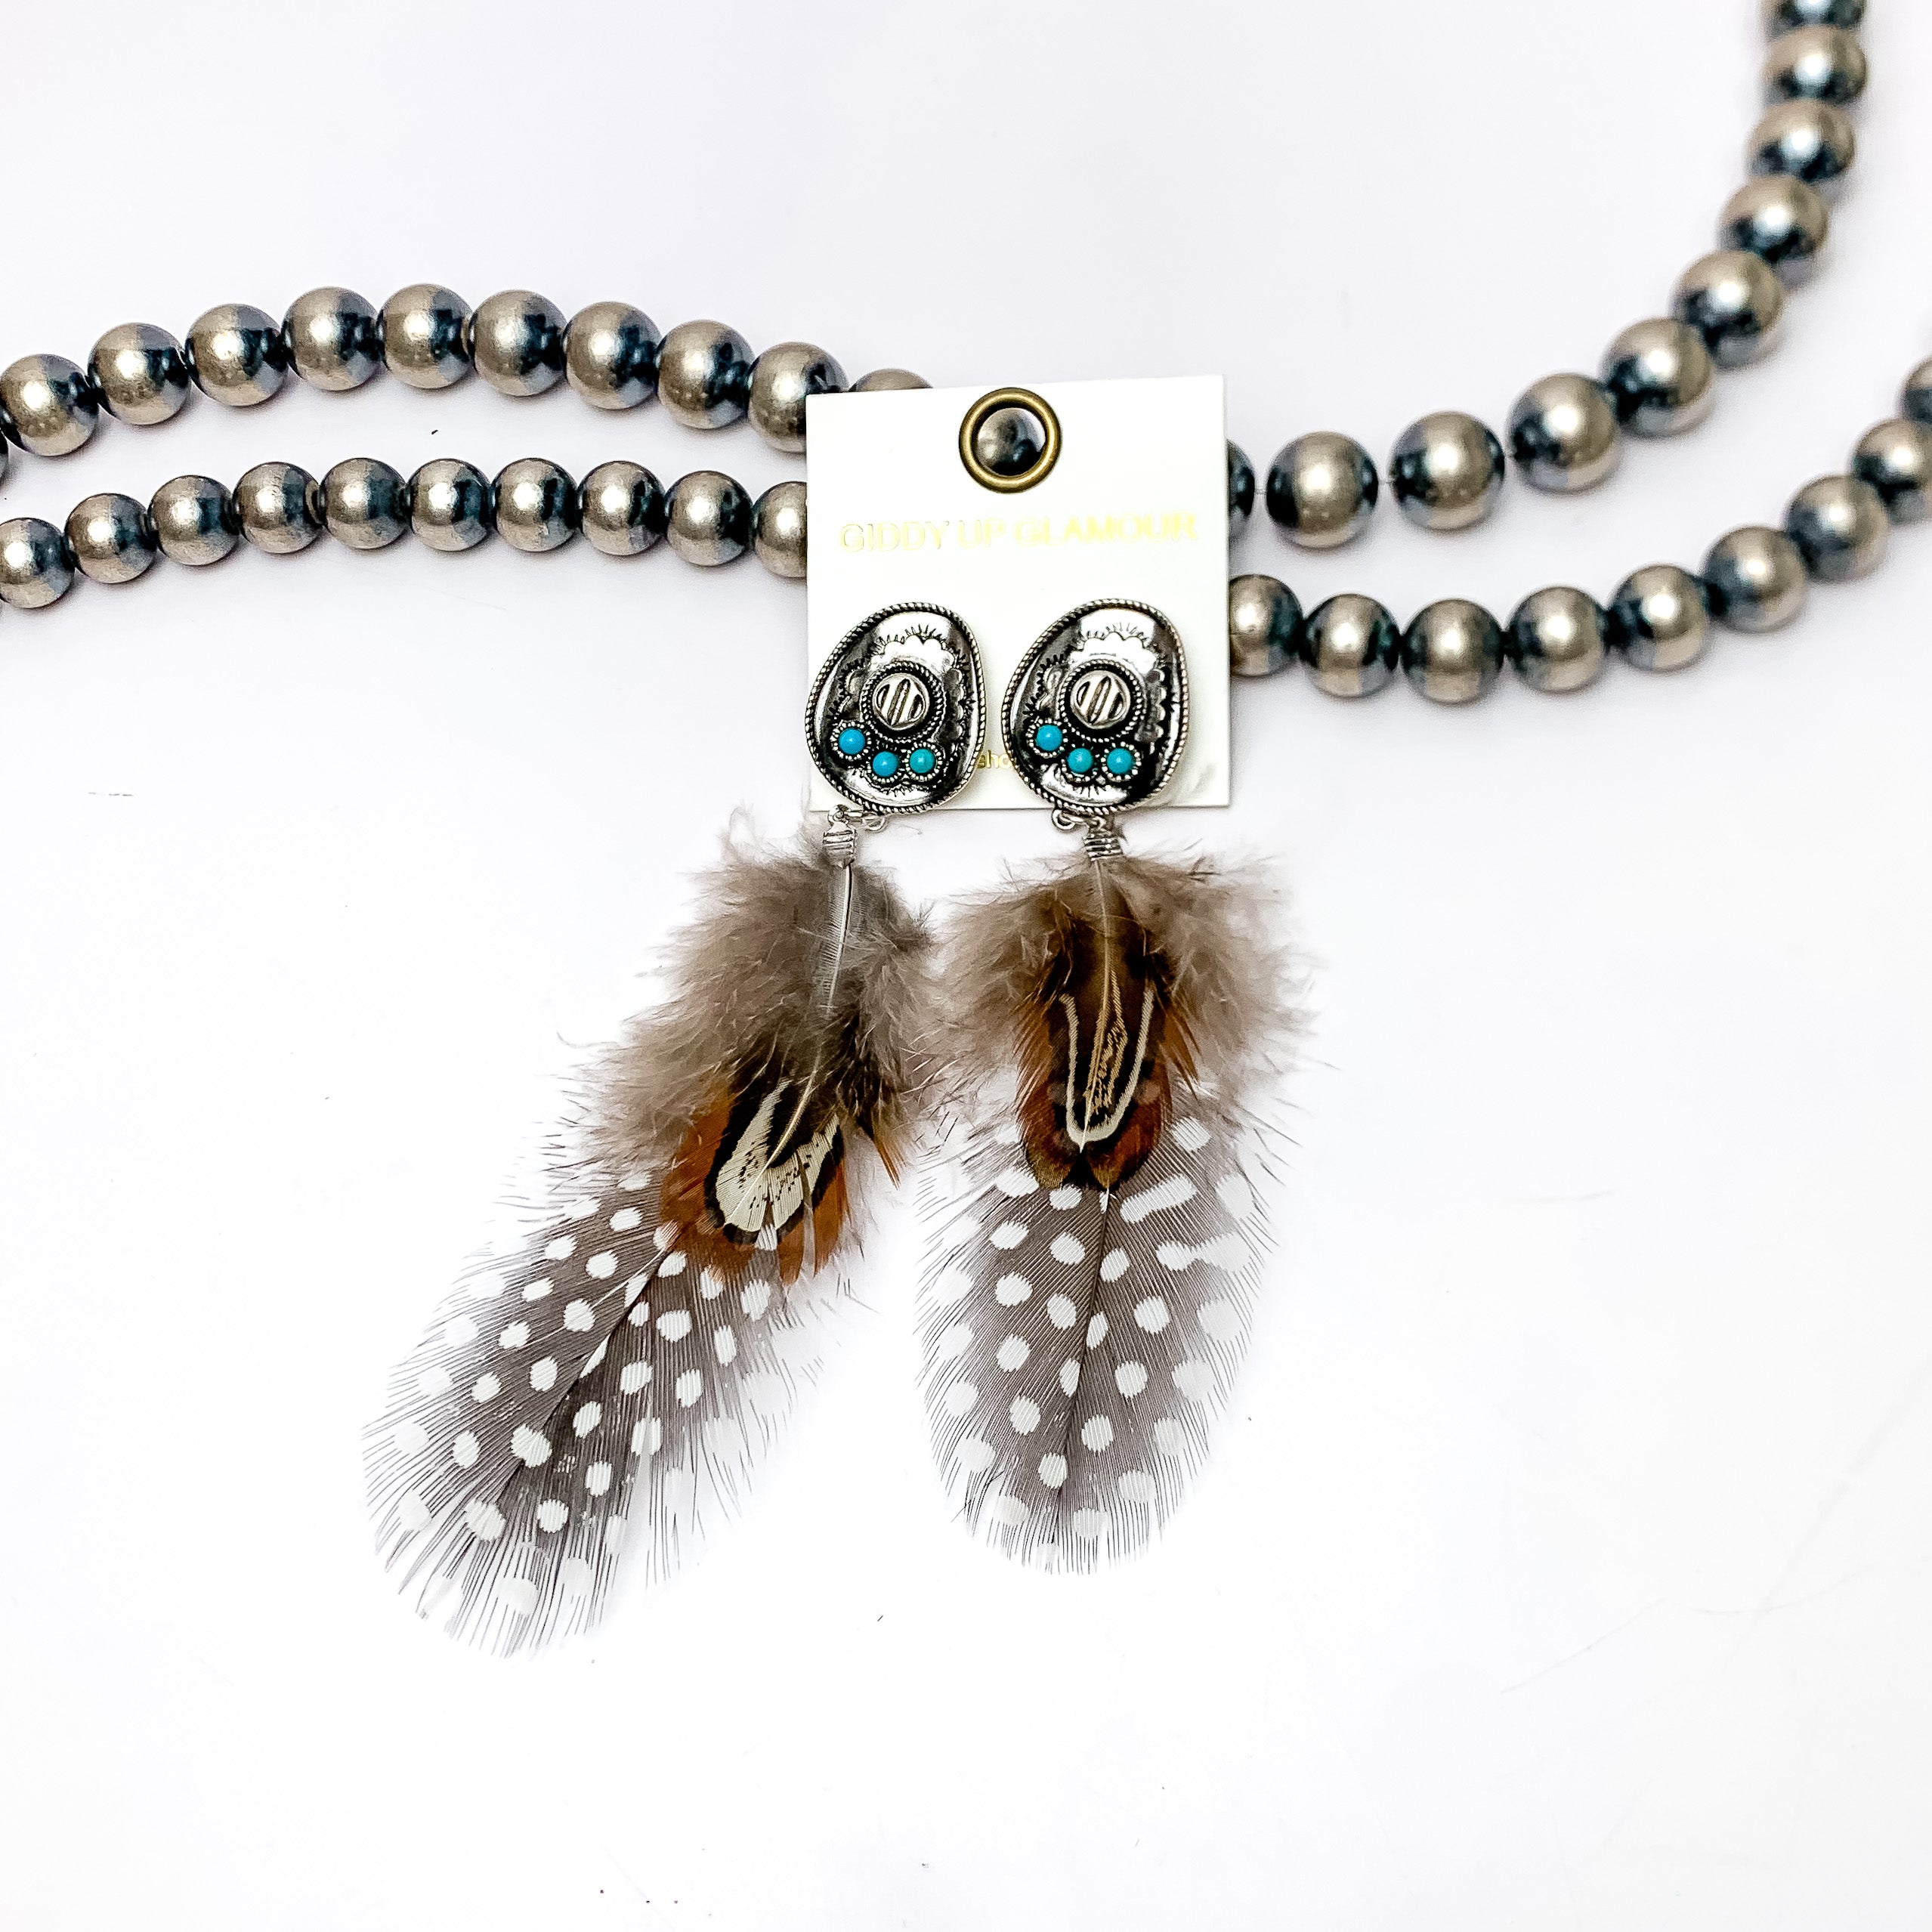 Cowboy Hat Post Feather Earrings in Brown and Black. These Earrings are pictured laying against Navajo pearls with a white background.